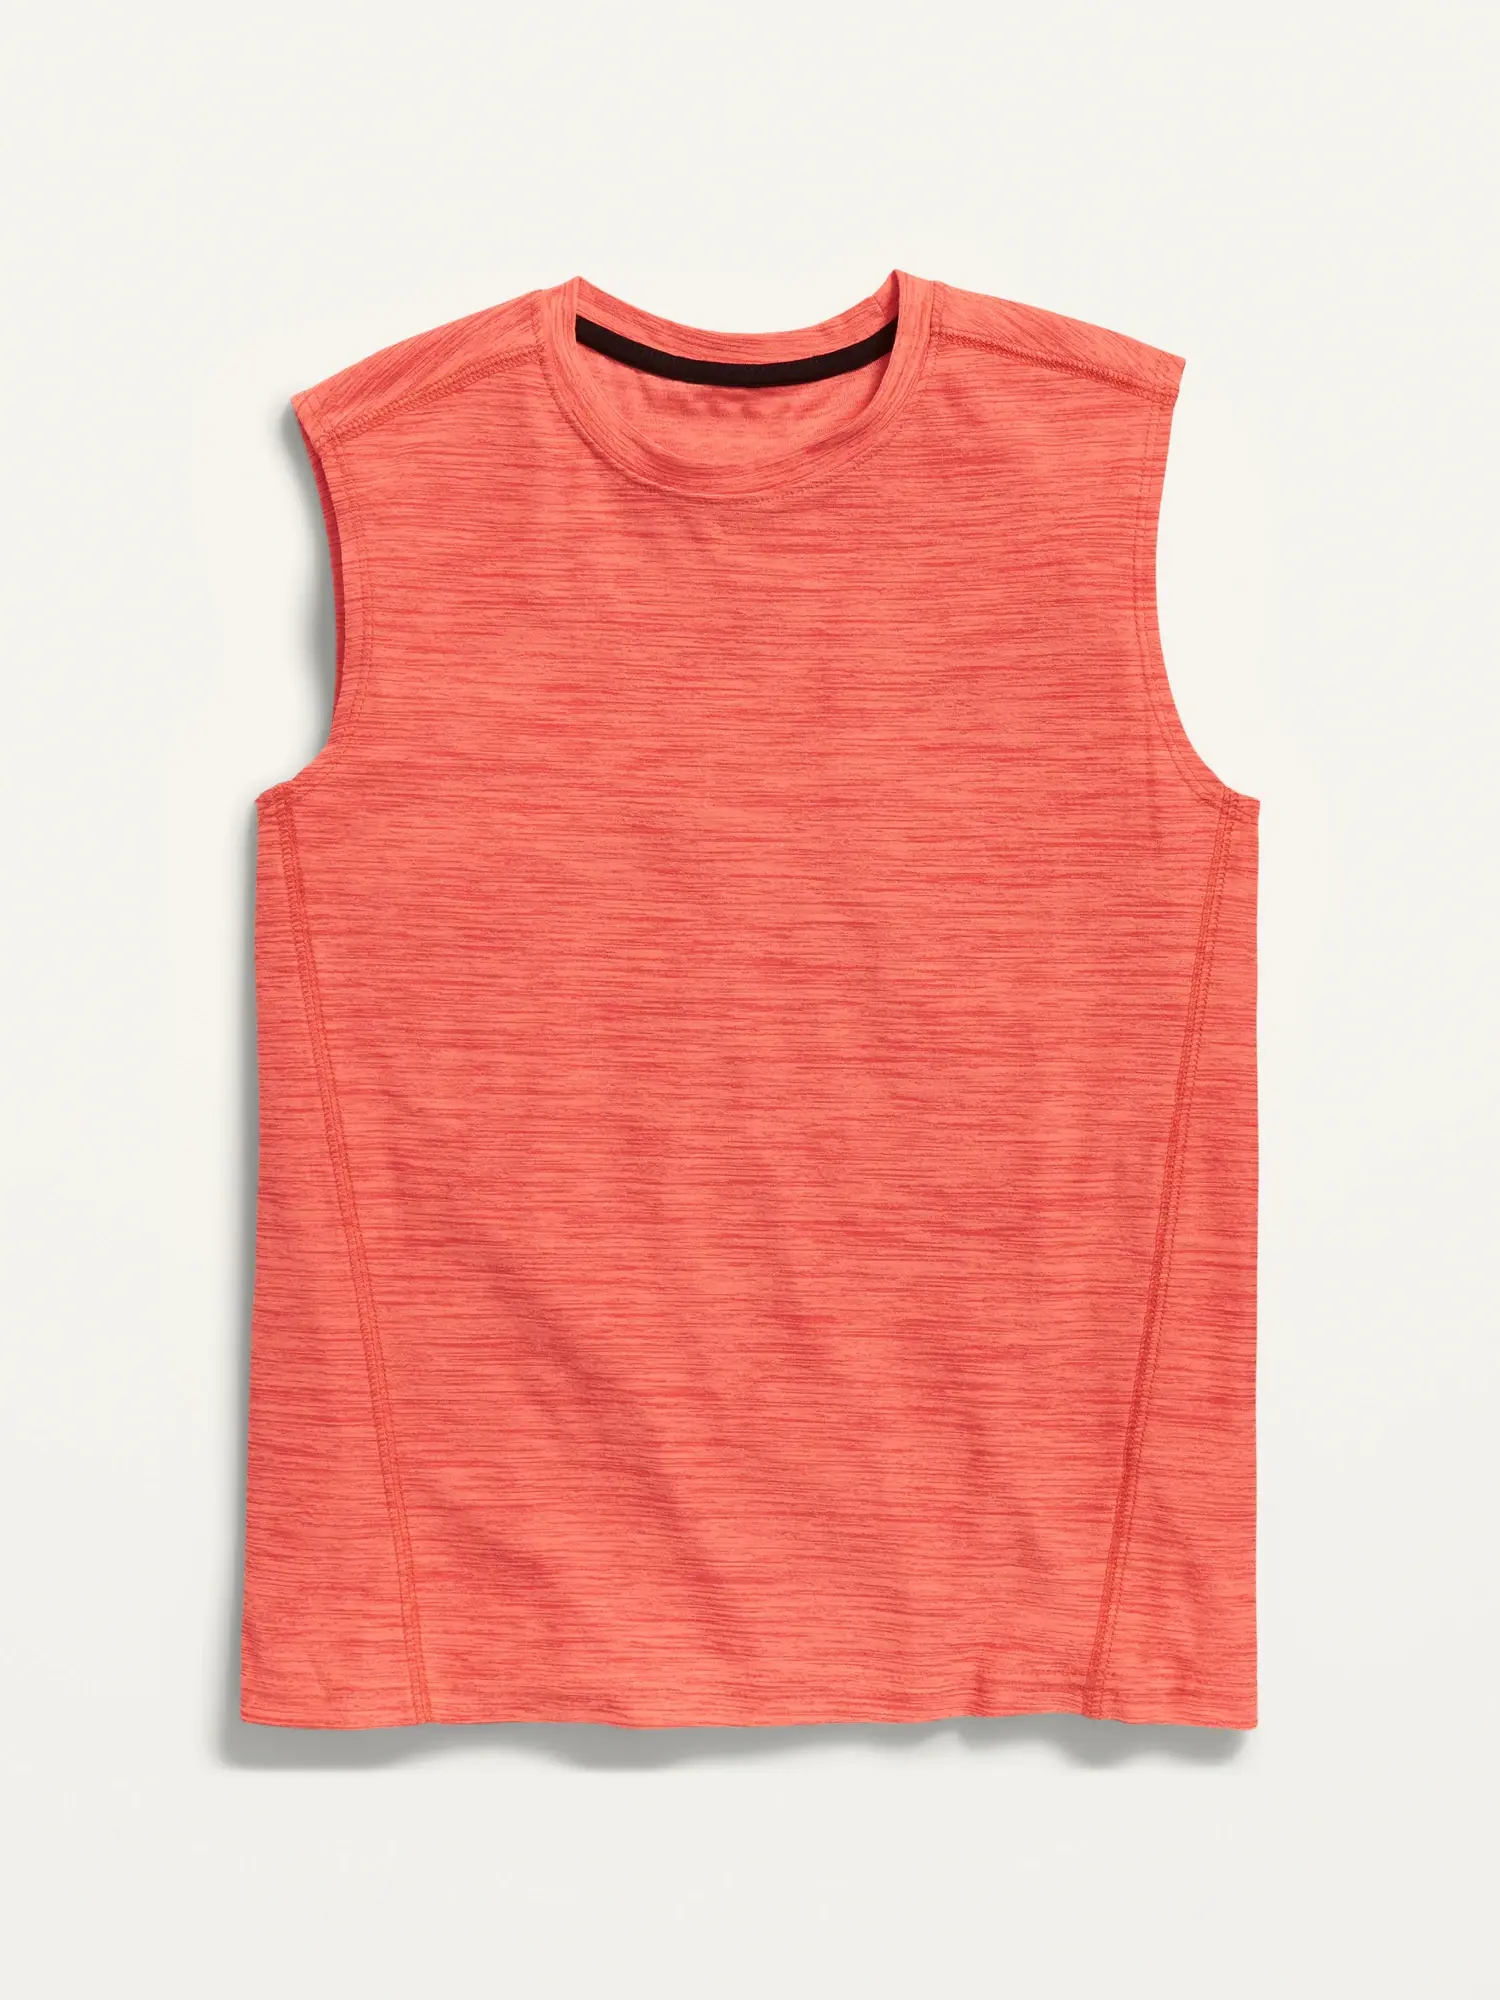 Old Navy Breathe ON Performance Tank Top for Boys pink. 1